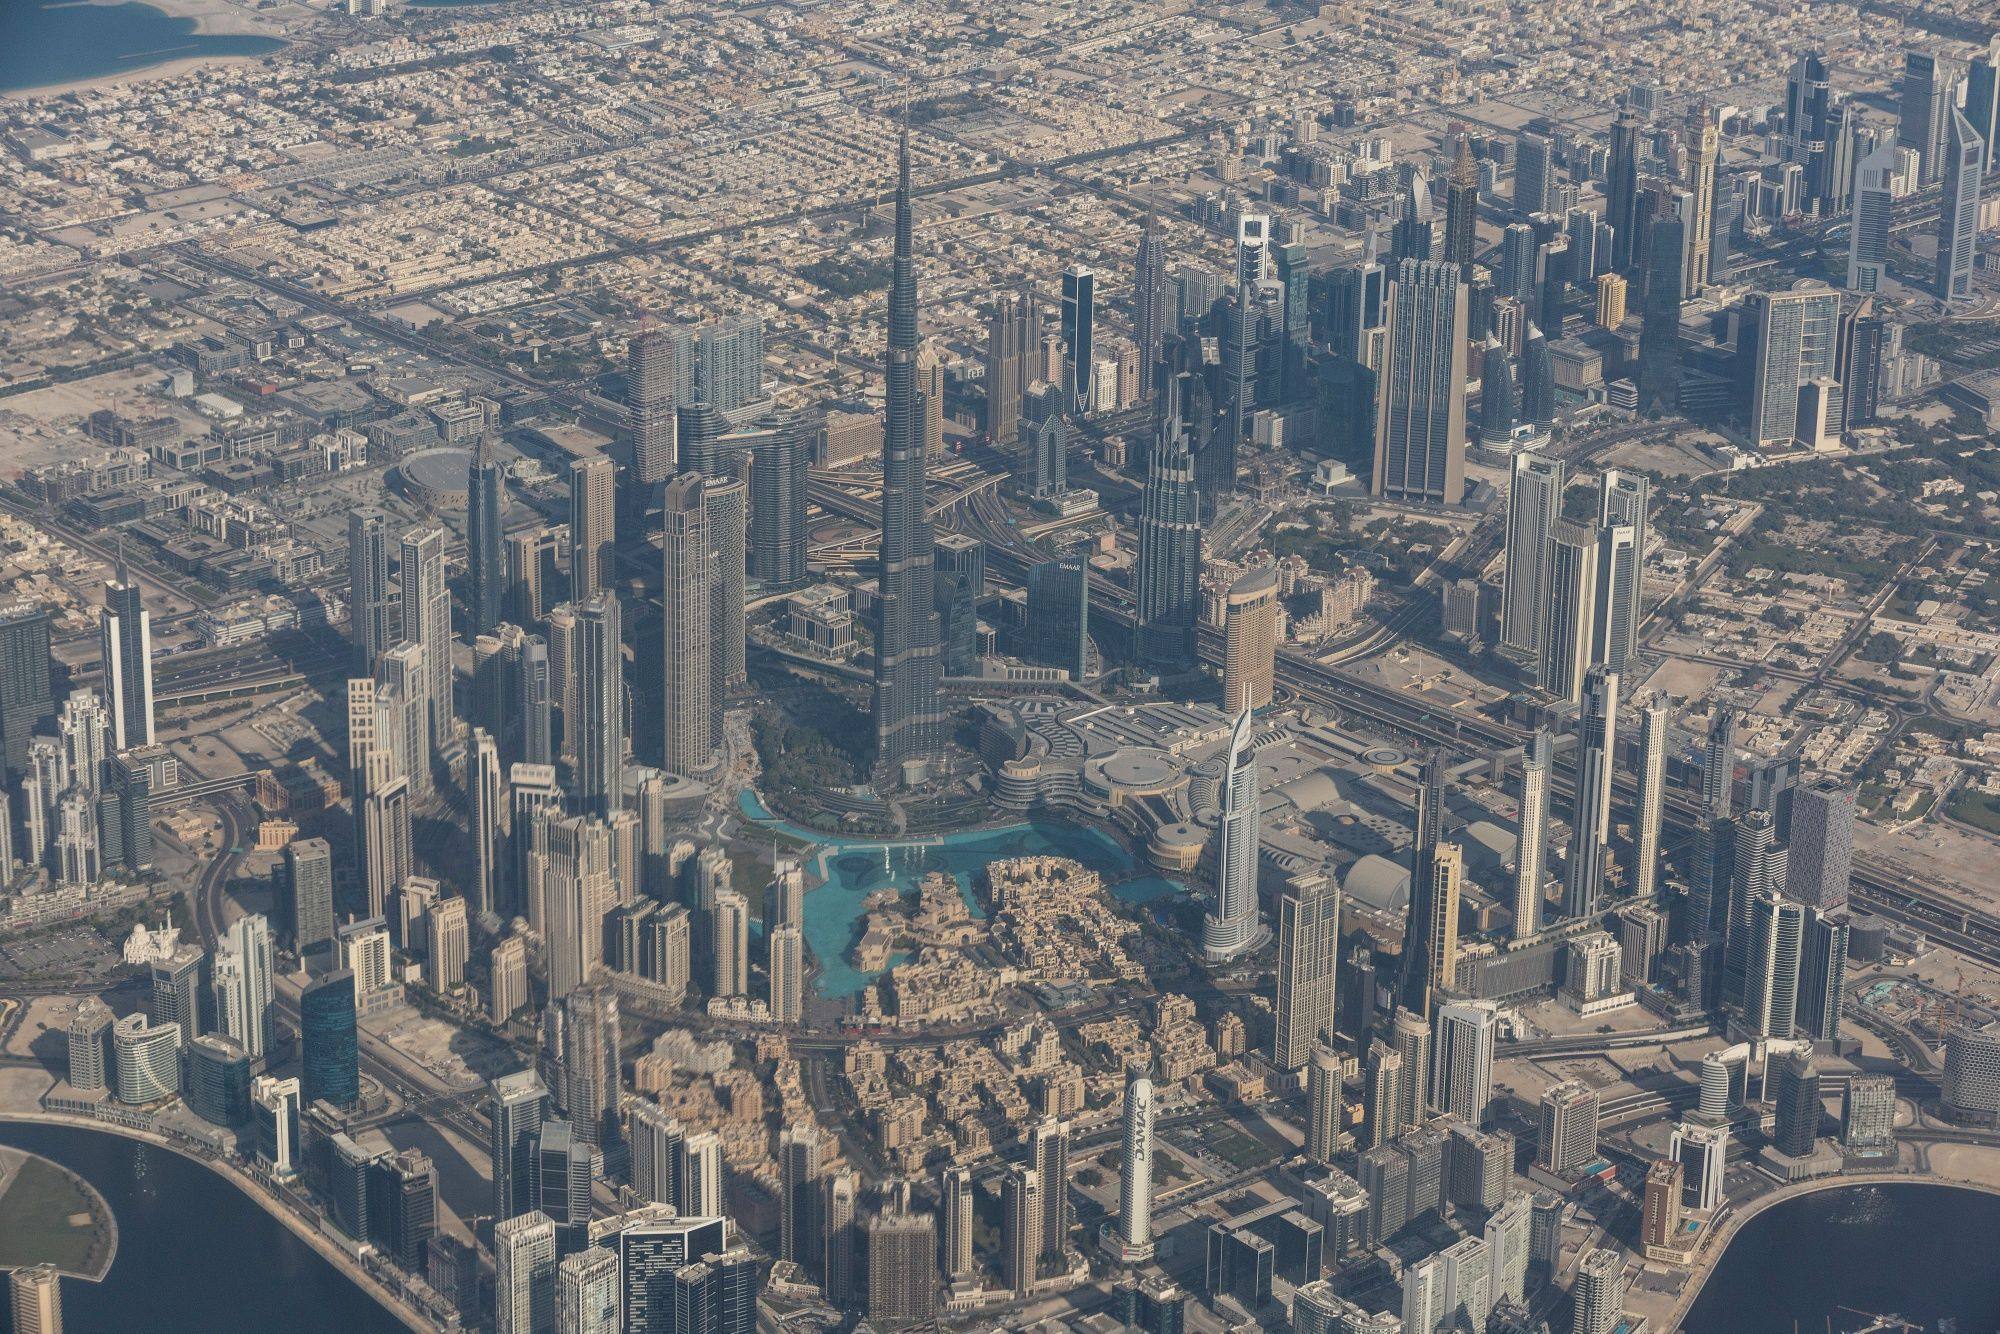 The Burj Khalifa skyscraper dominates the skyline in Dubai, United Arab Emirates, one of the Middle East areas targeted by Hong Kong for stronger trade links. Photo: Bloomberg